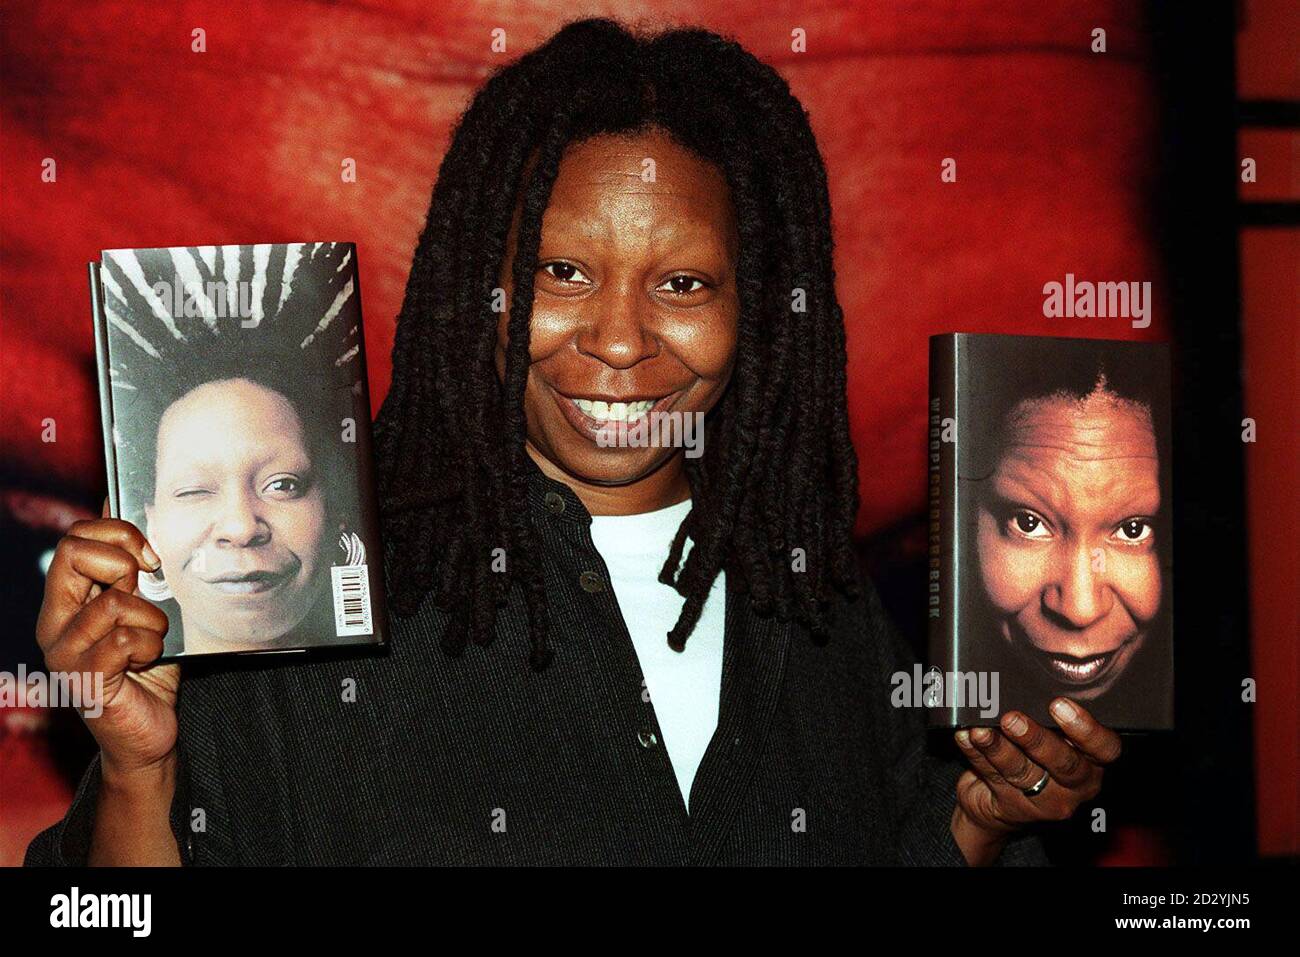 PA NEWS PHOTO 23/4/98 WHOOPI GOLDBERG AT THE LAUNCH OF HER NEW BOOK 'BOOK' AT THE MUSEUM OF THE MOVING IMAGE IN LONDON Stock Photo